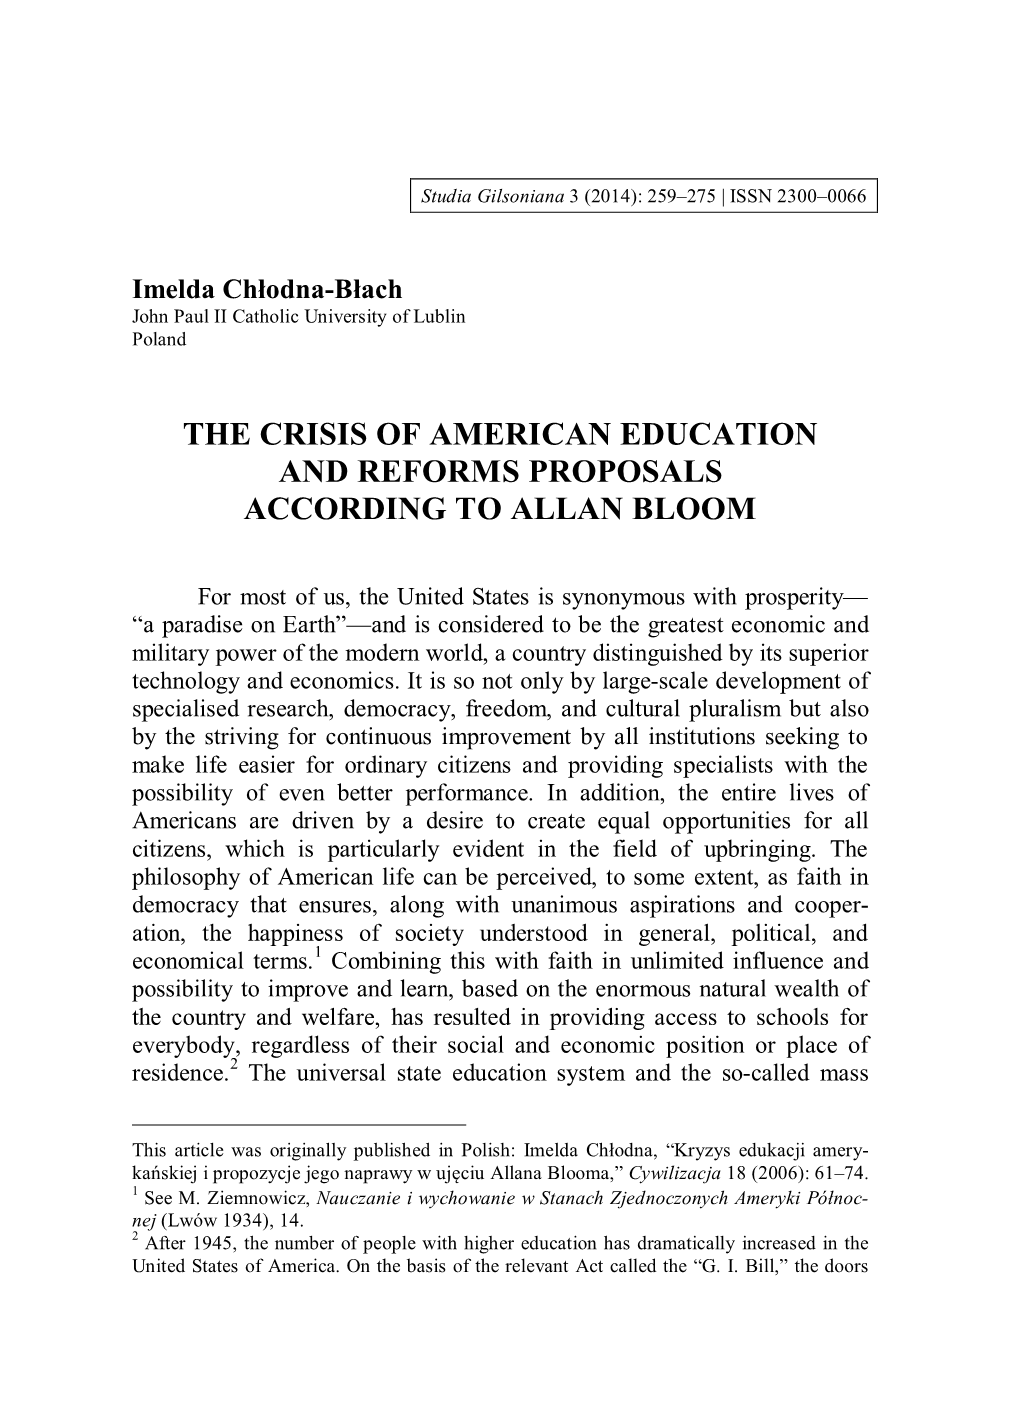 The Crisis of American Education and Reforms Proposals According to Allan Bloom